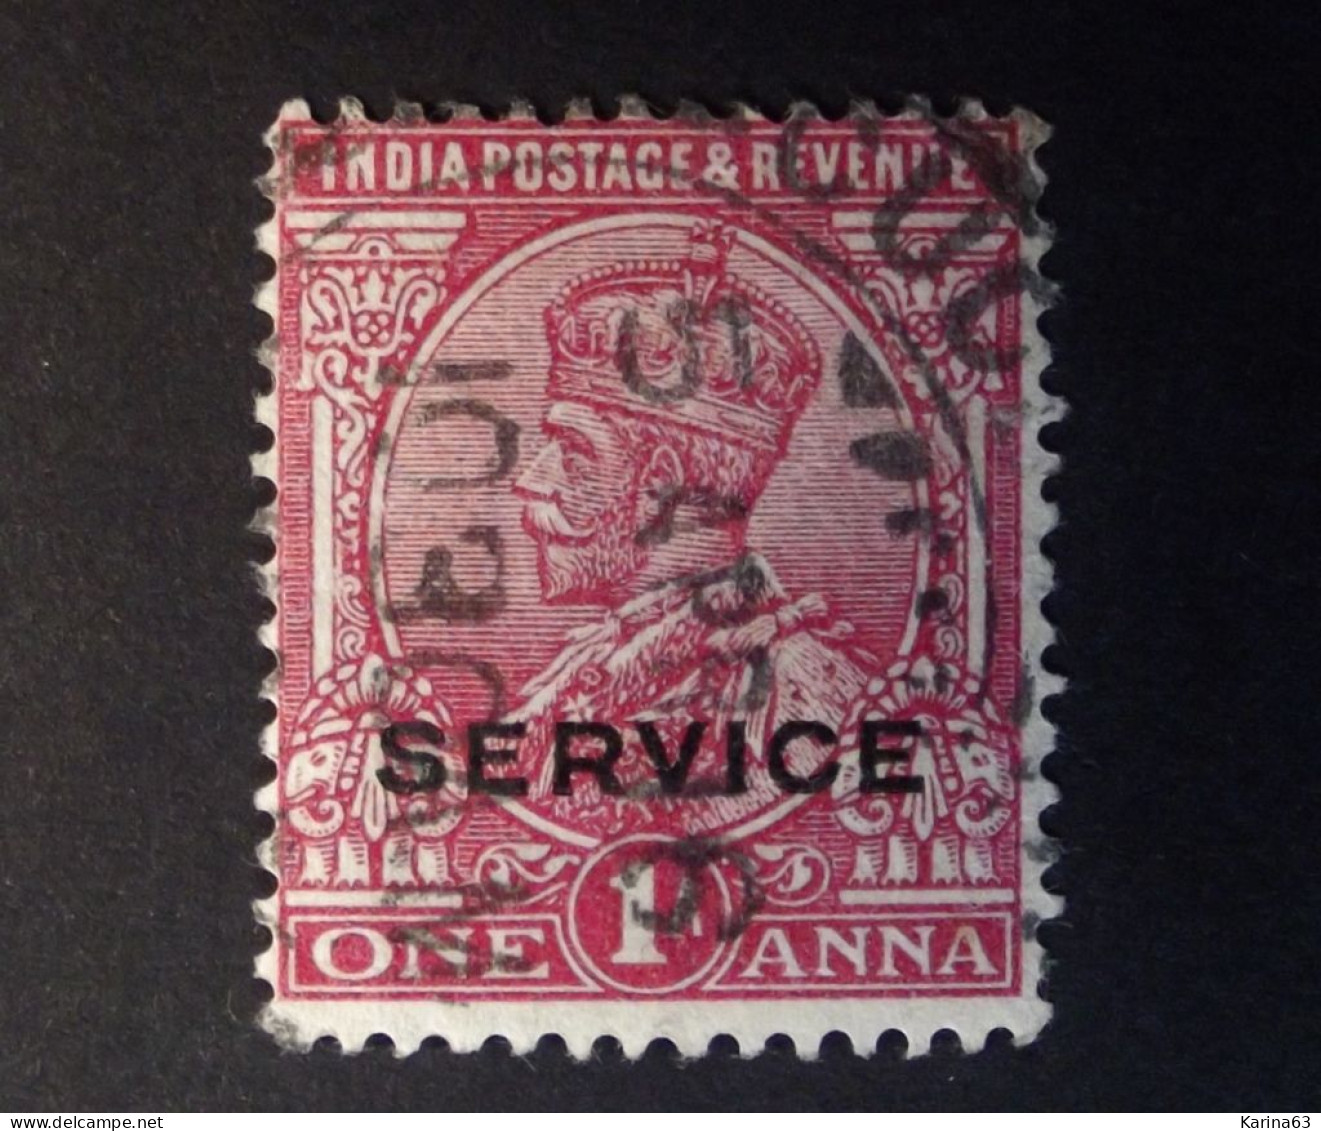 British India - INDIA -  King George V  - 1 Anna  Service  Watermark - Cancelled - 1911-35 Roi Georges V